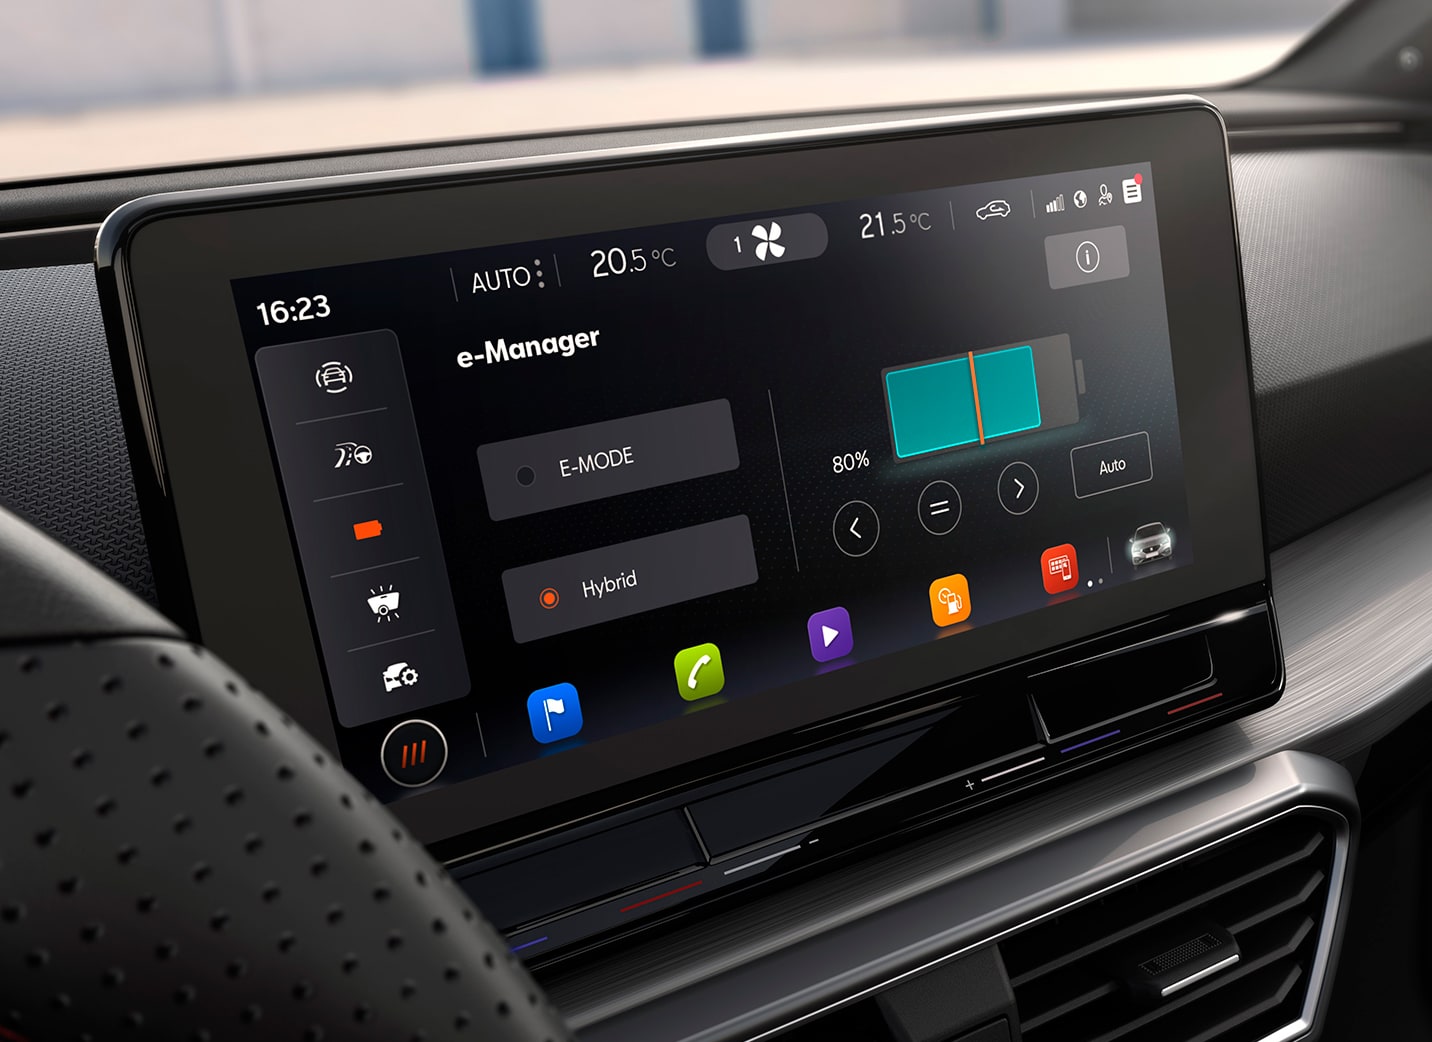 SEAT Leon sportstourer 2020 e-Hybrid 10 inch navi system with phev screen detailed view